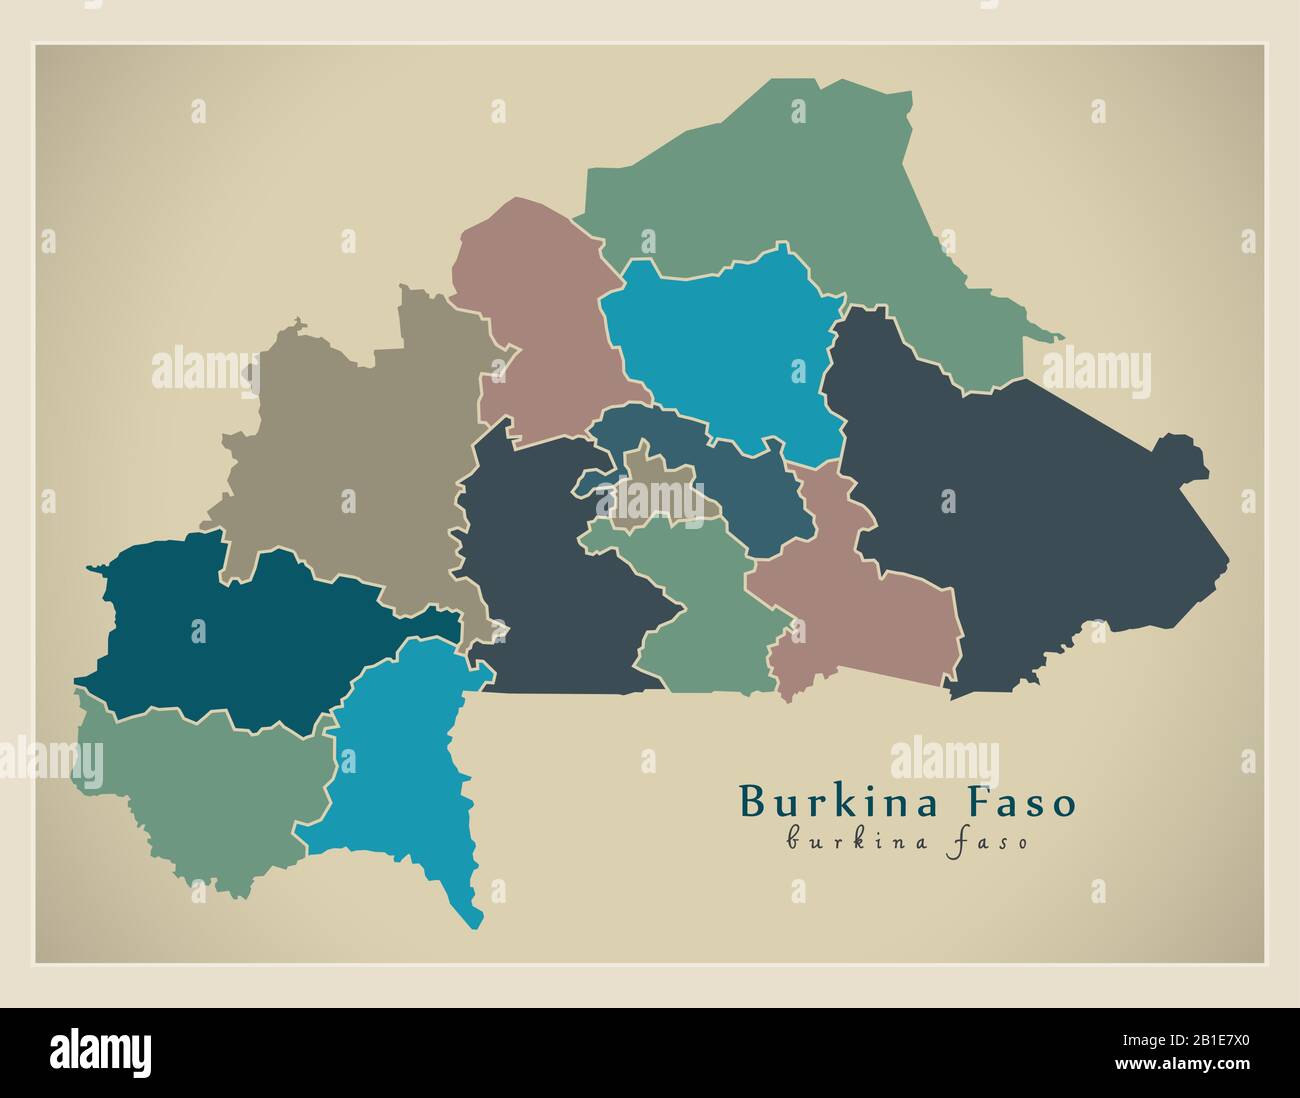 Modern Map Burkina Faso With Different Colored Regions Update 2020 2B1E7X0 